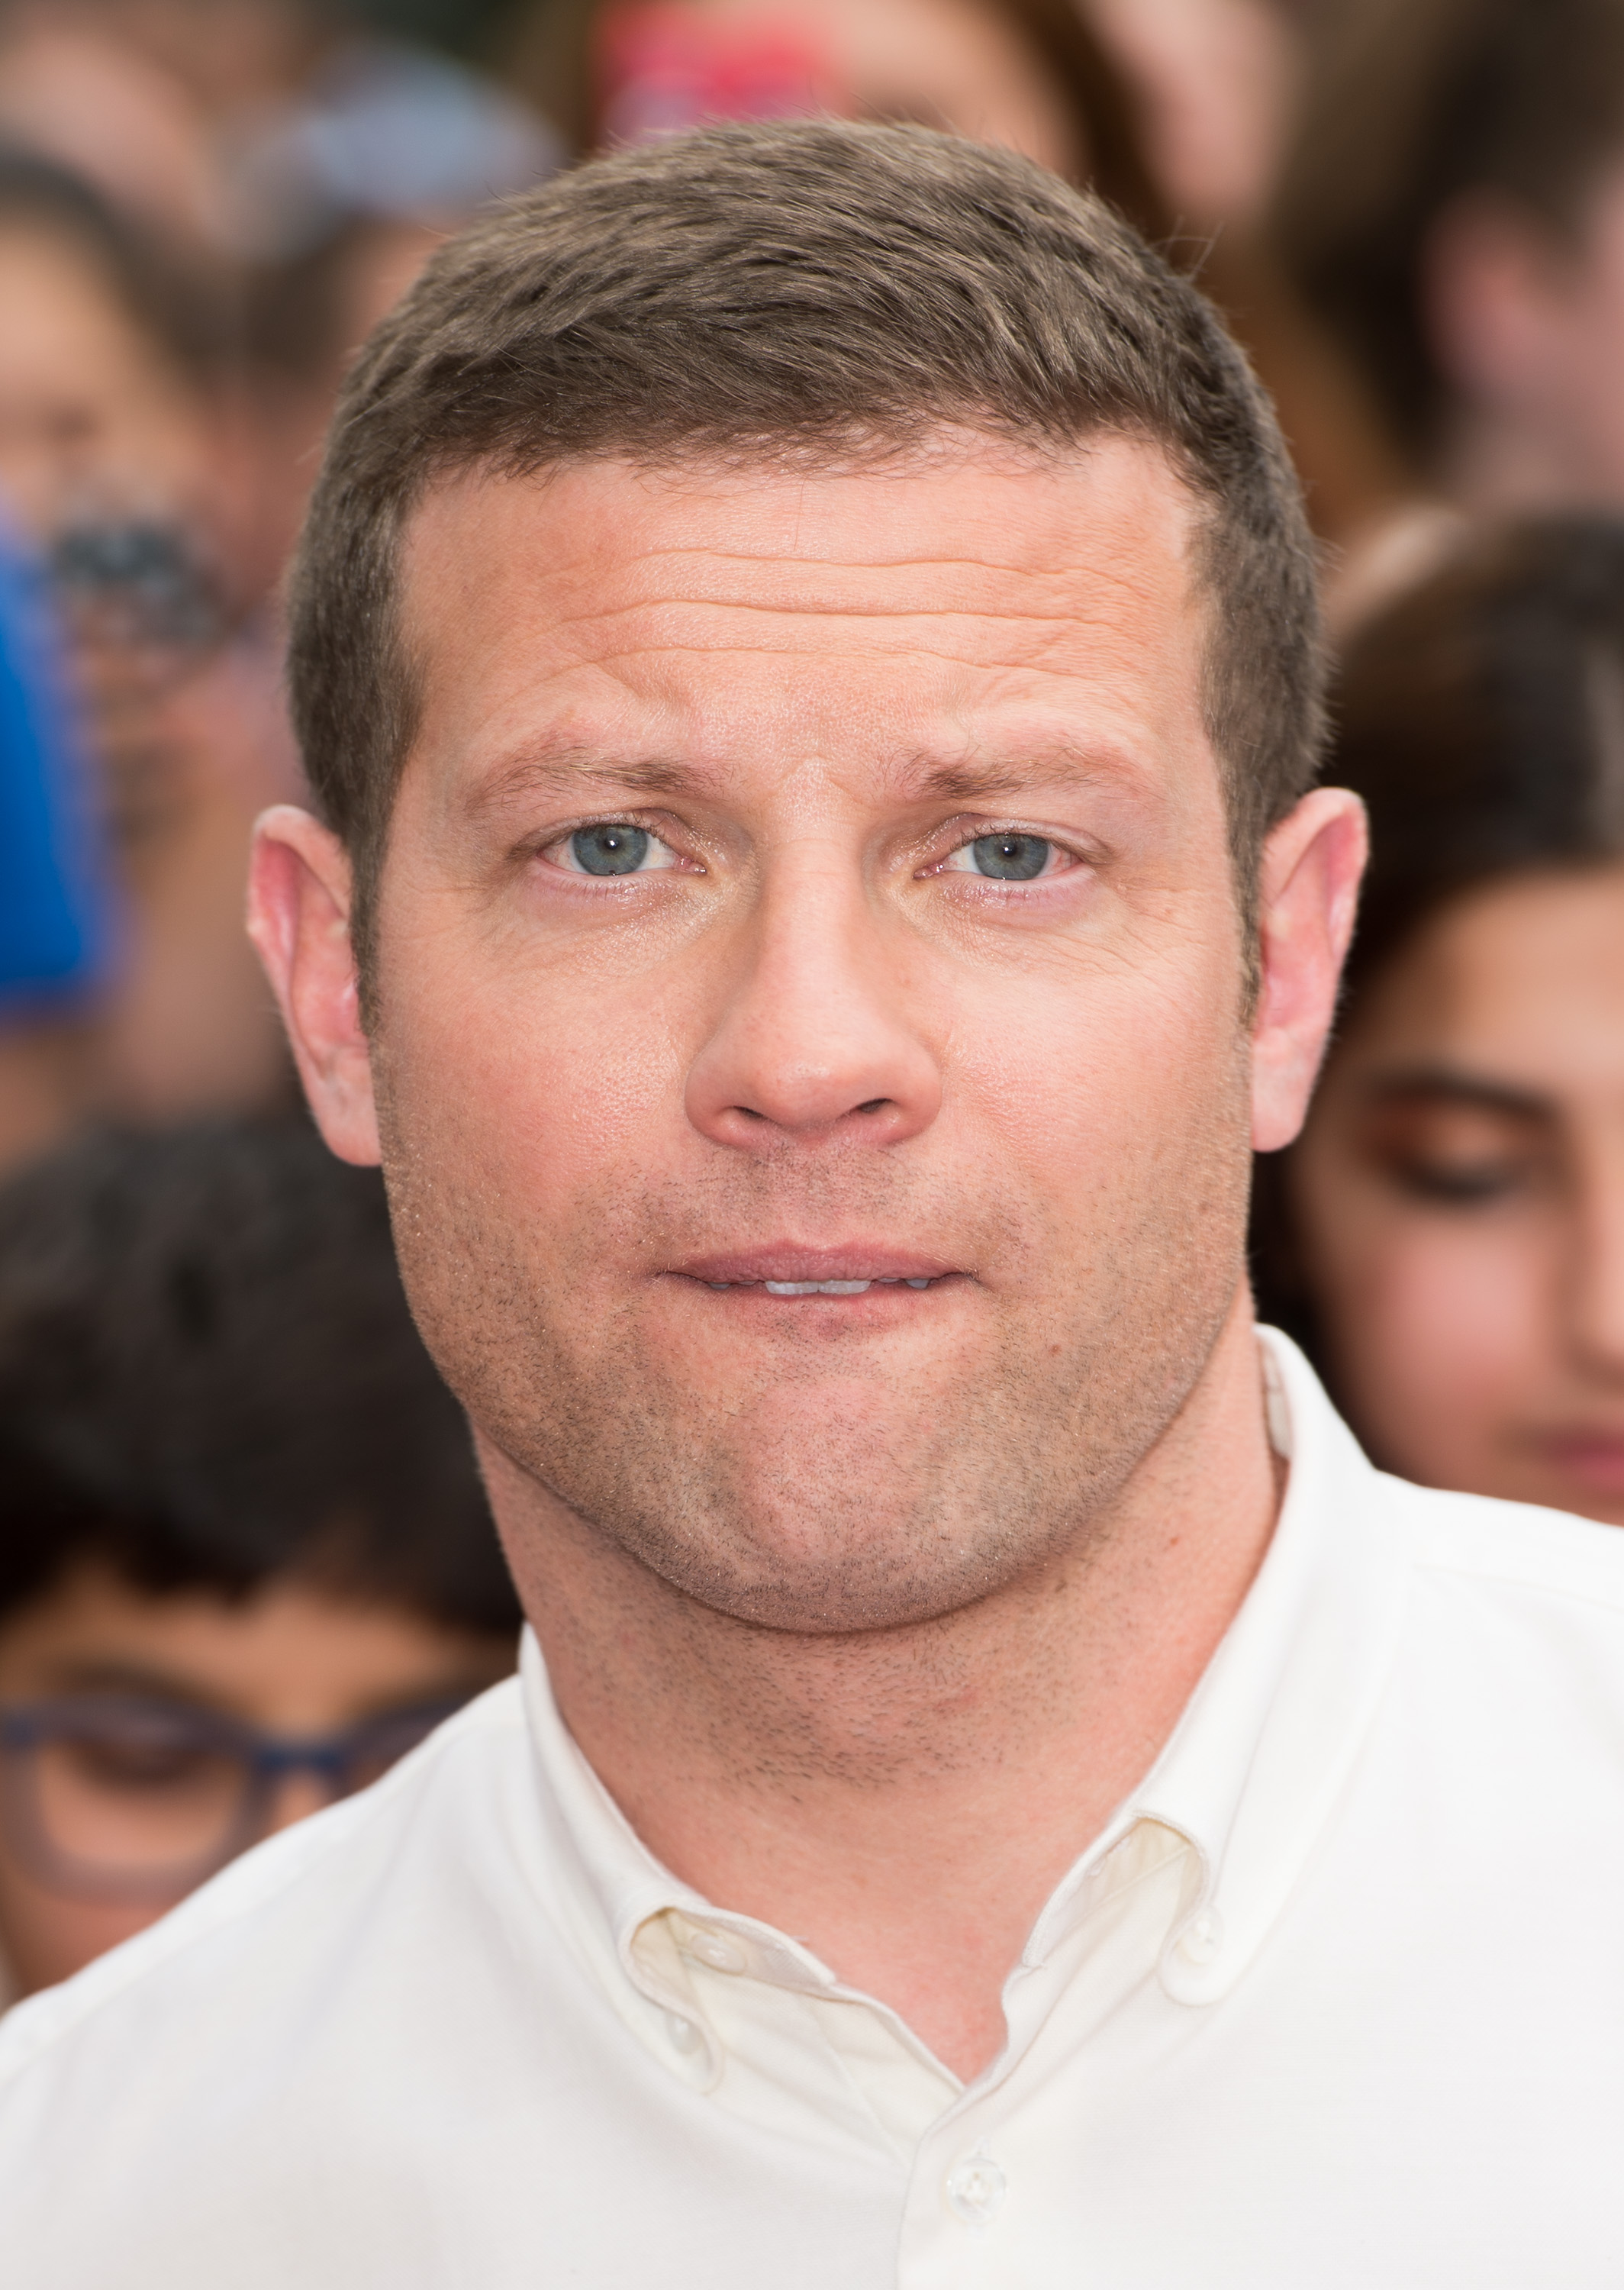 Dermot O'Leary le 1er août 2014 à Londres, Angleterre | Source : Getty Images